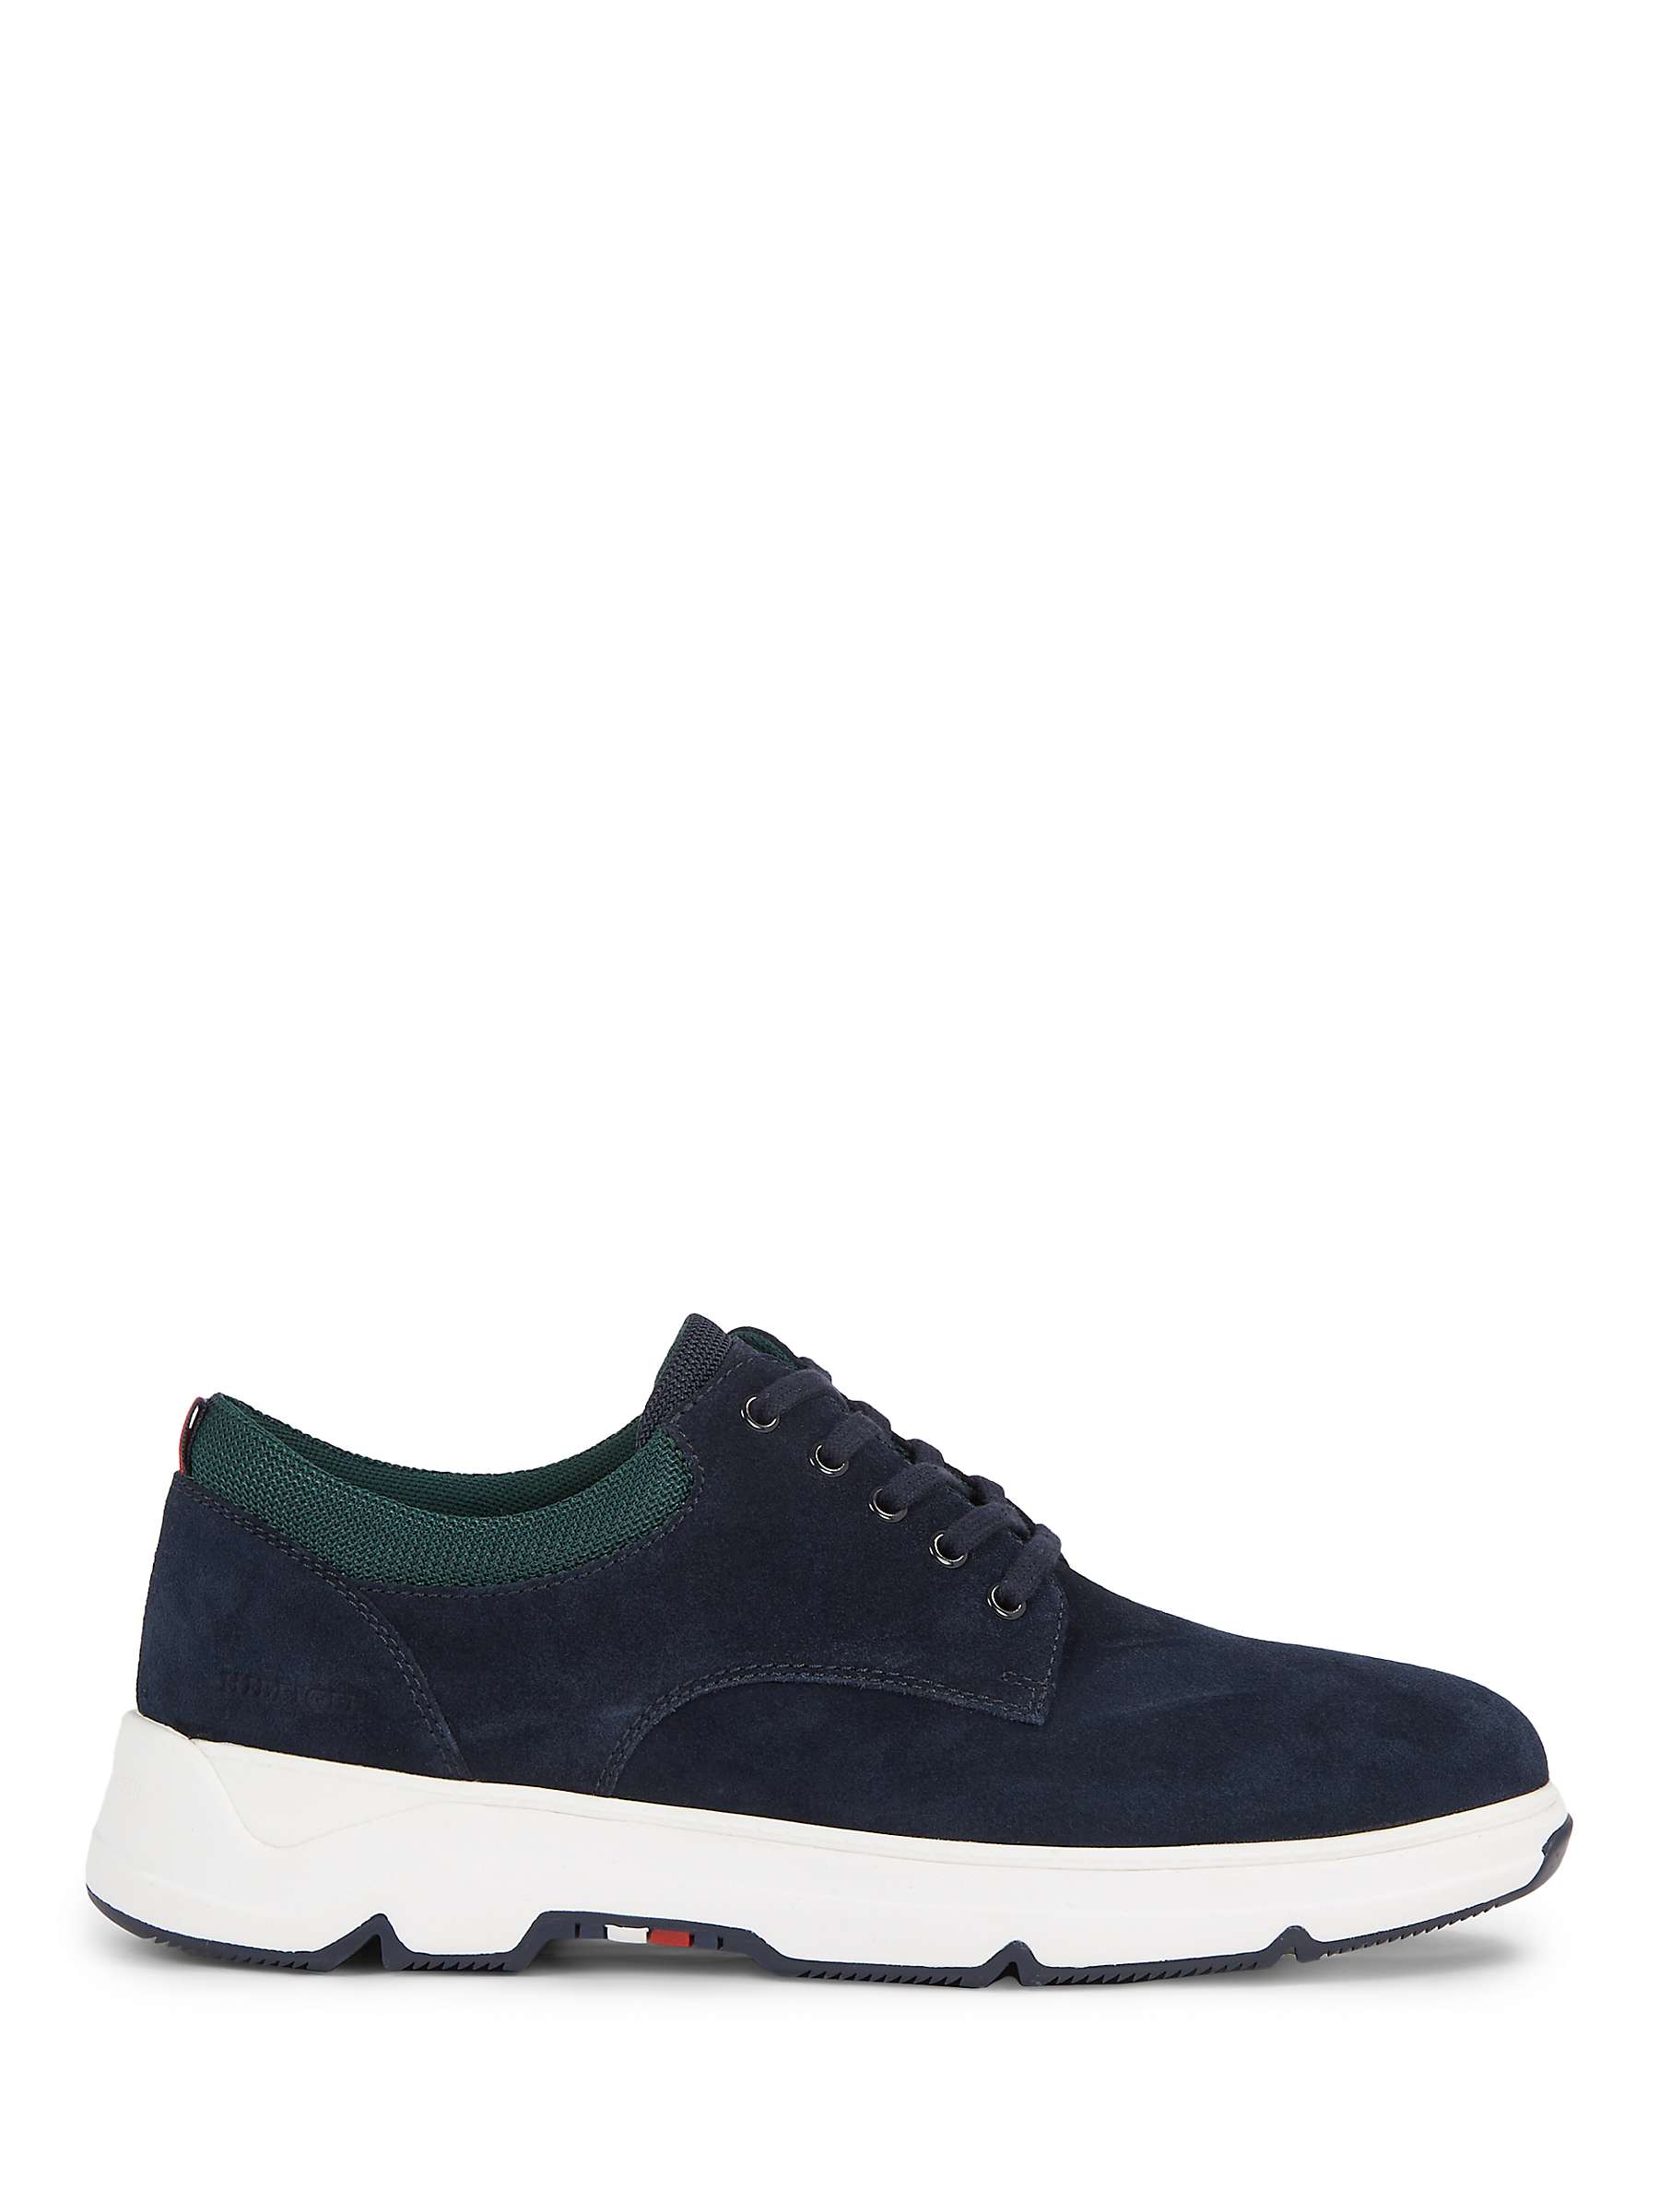 Buy Tommy Hilfiger Hybrid Suede Lace Up Trainers, Desert Sky Online at johnlewis.com